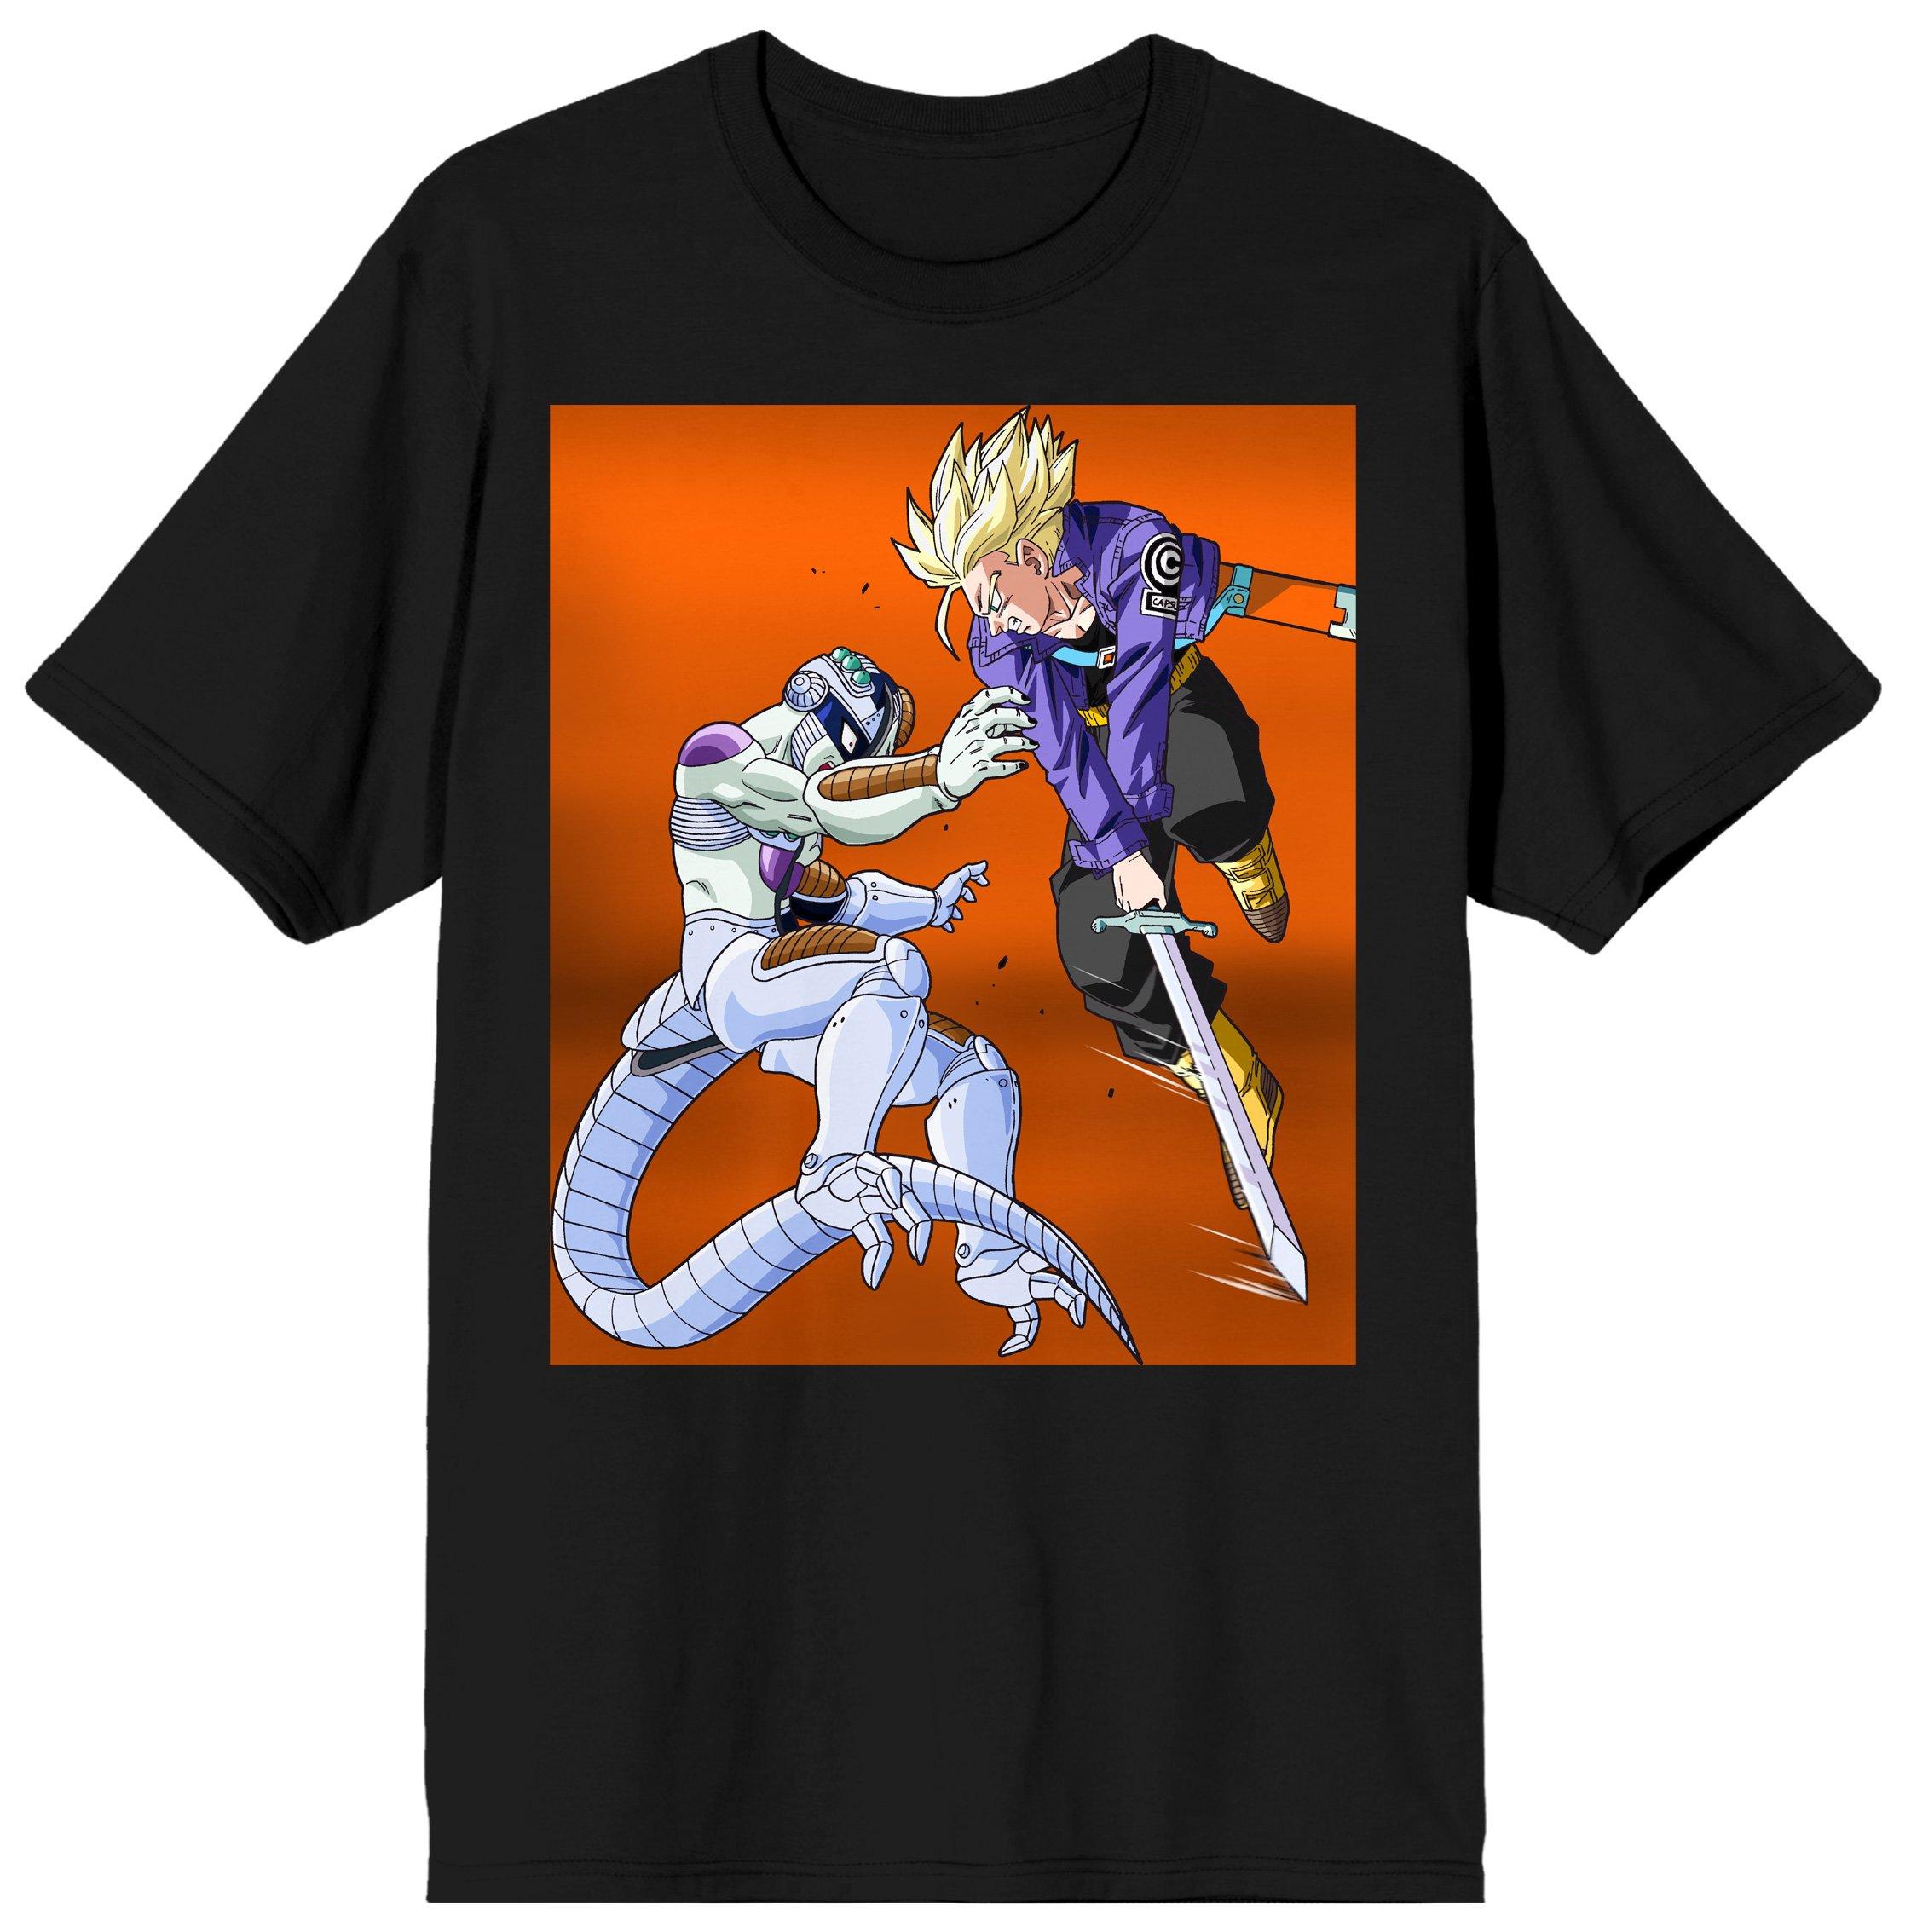 Dragon Ball Z Trunks and Frieza Character Group Men's Black Short Sleeve Graphic T-Shirt, Size: Small, Bioworld Merchandising